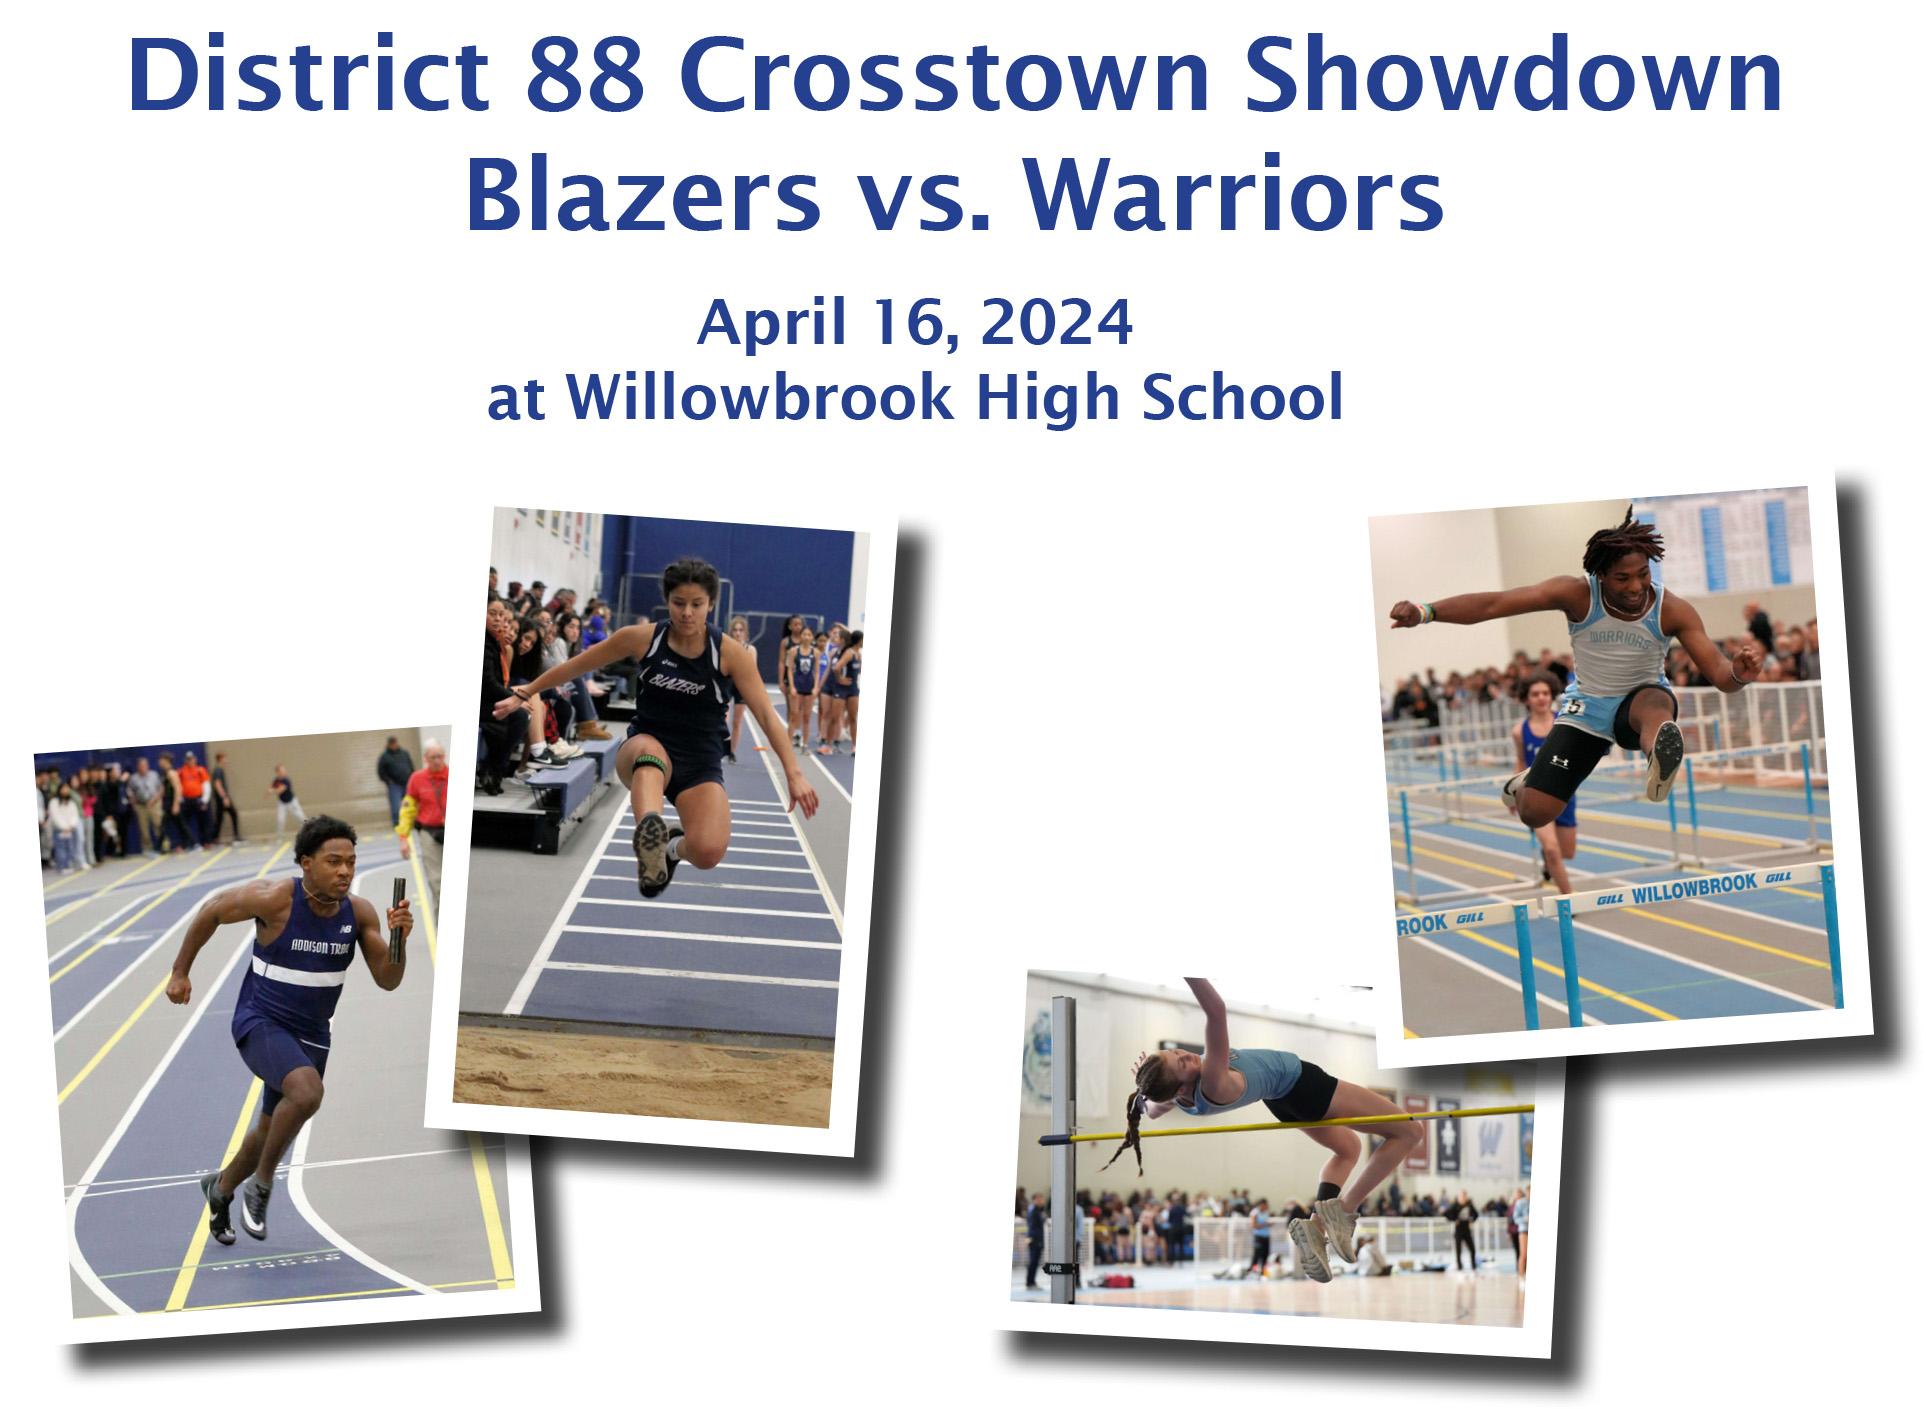 District 88 invites stakeholders to attend Crosstown Showdown